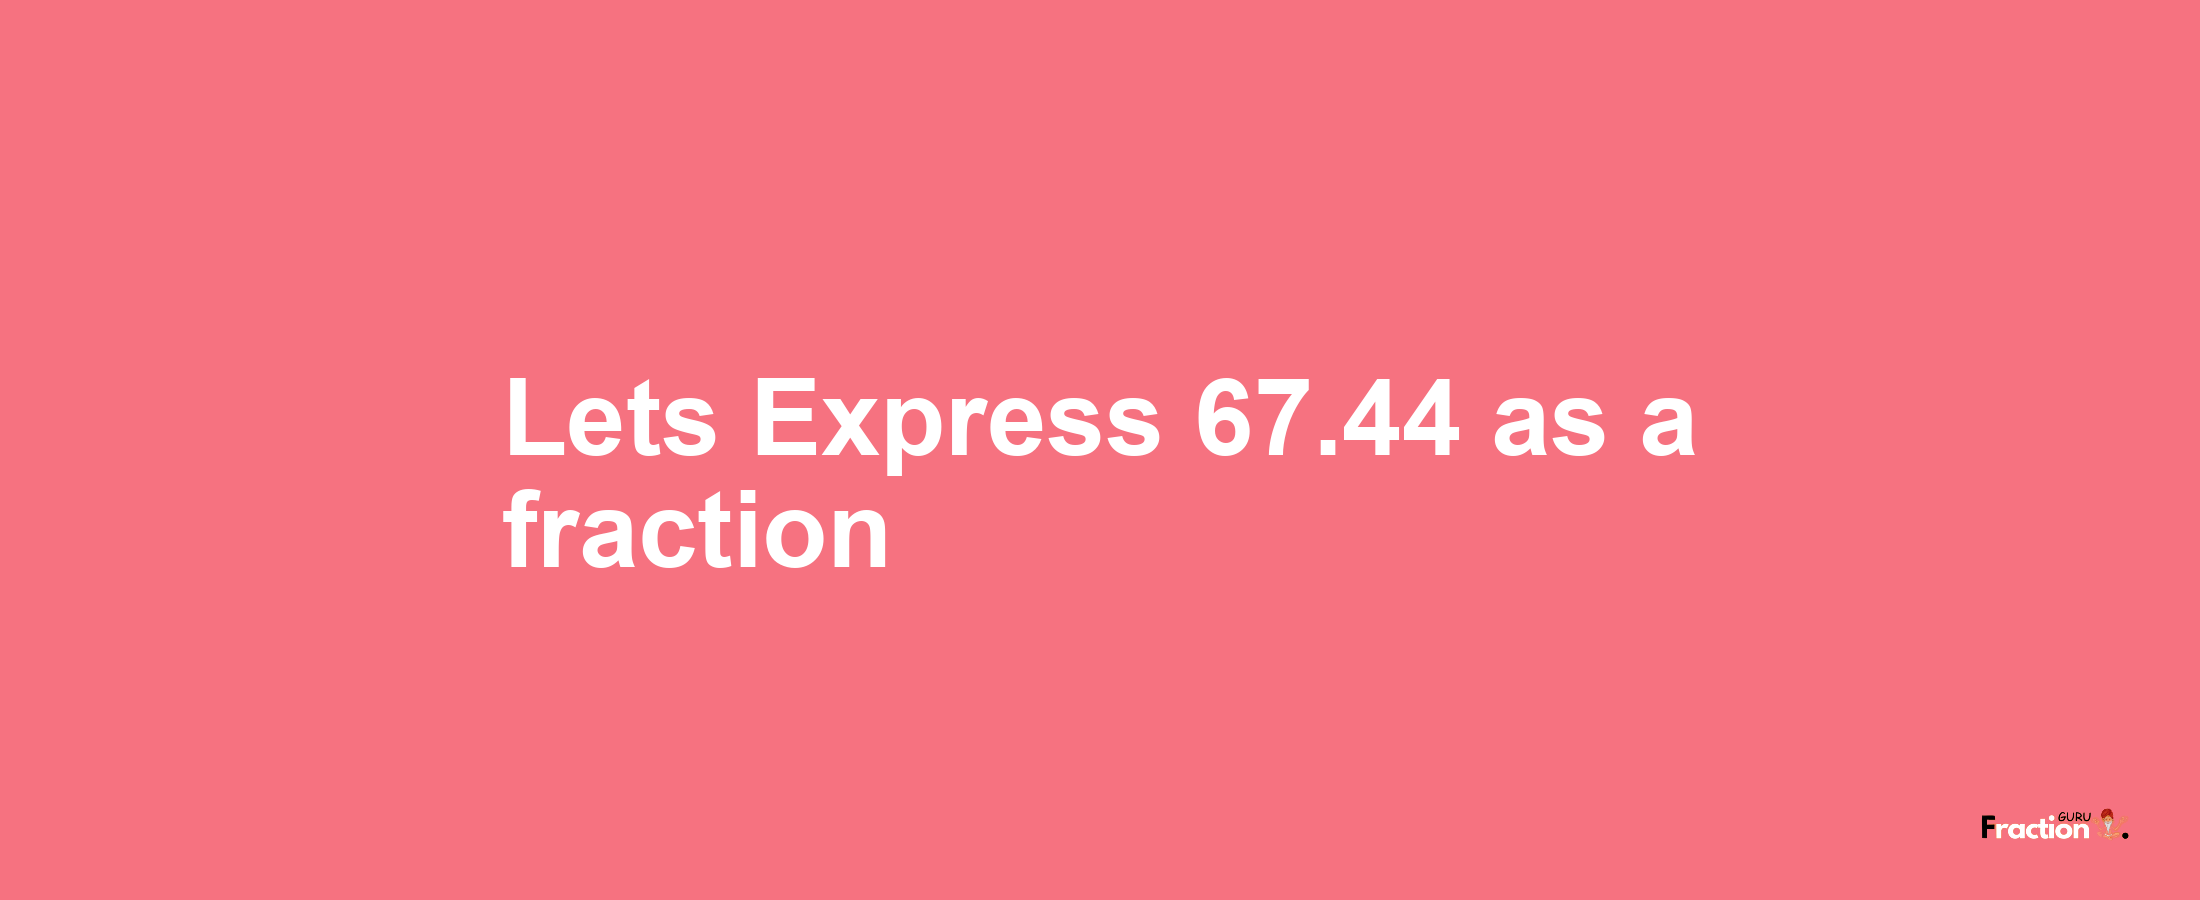 Lets Express 67.44 as afraction